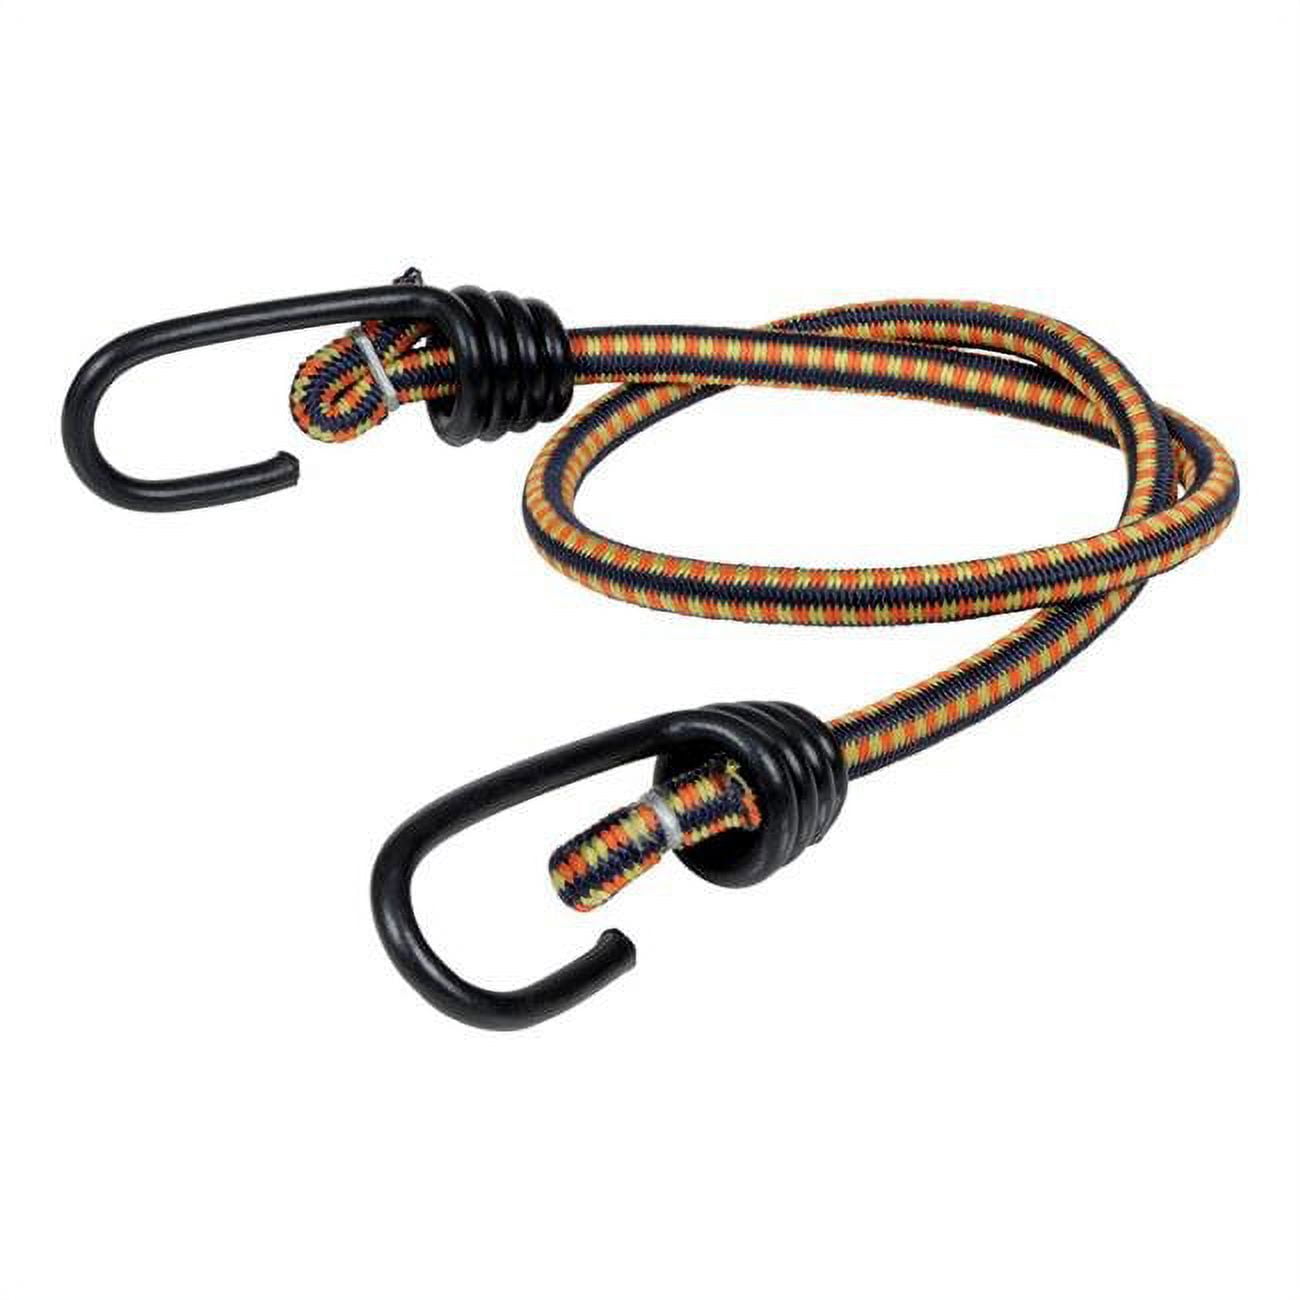 8866352 Multi Color Bungee Cord, 24 X 0.315 In. - Case Of 10